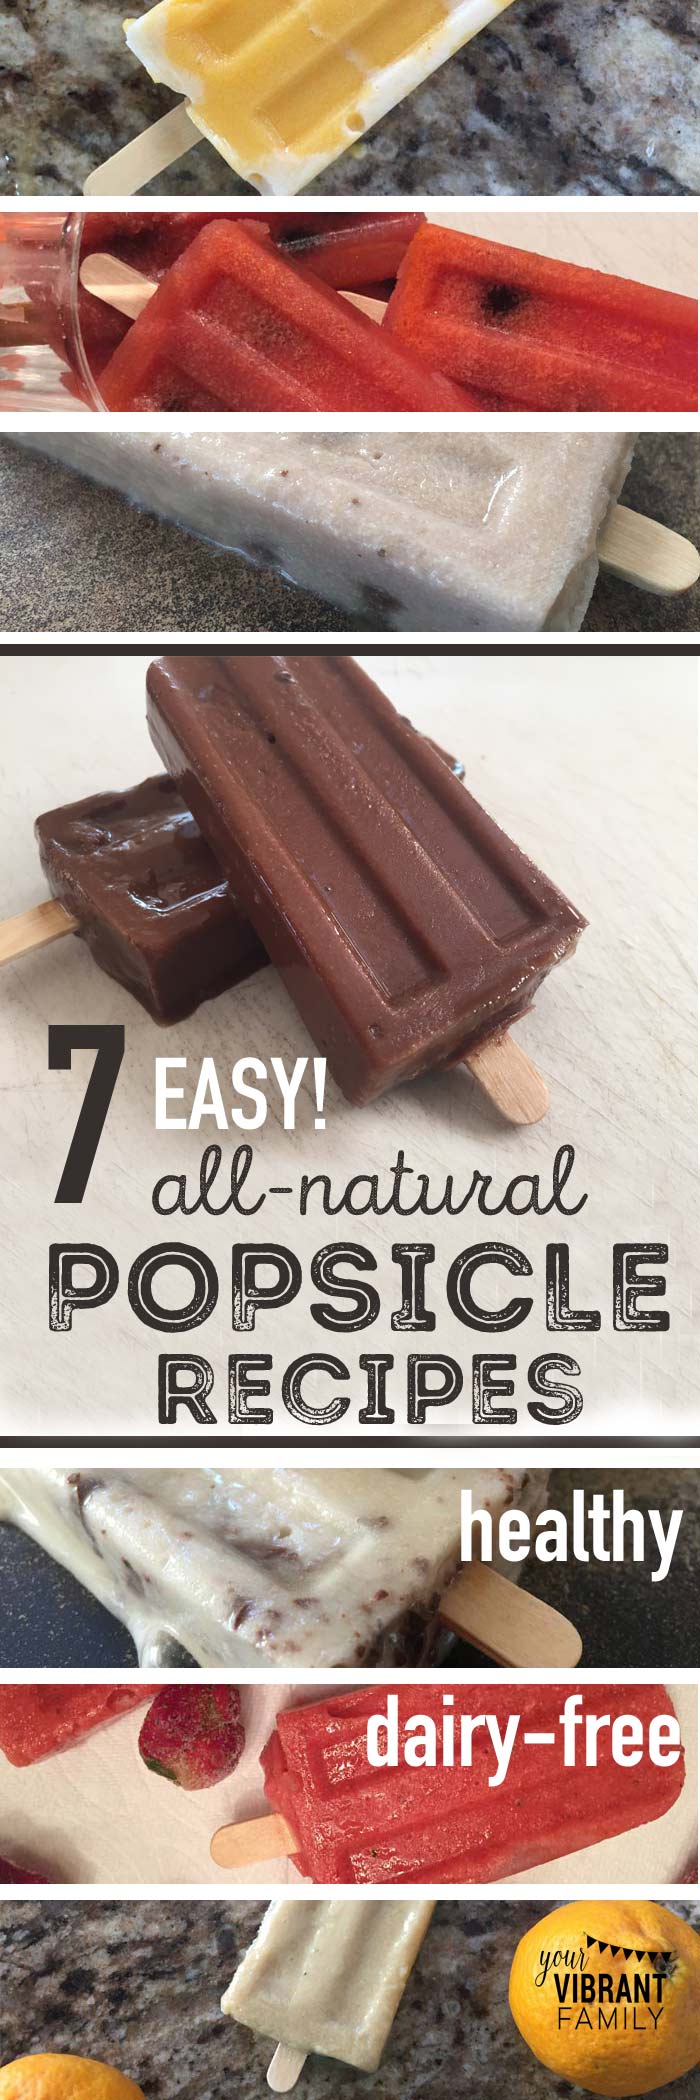 Homemade popsicles can be so easy (and fun!) to make… that is, if you know some popsicle making secrets (and have some great recipes!). My kids and I have been experimenting in the kitchen (and with popsicle molds) and have come up with these 7 super yummy popsicle recipes! Plus… you won’t believe what the SECRET INGREDIENT is in these recipes!